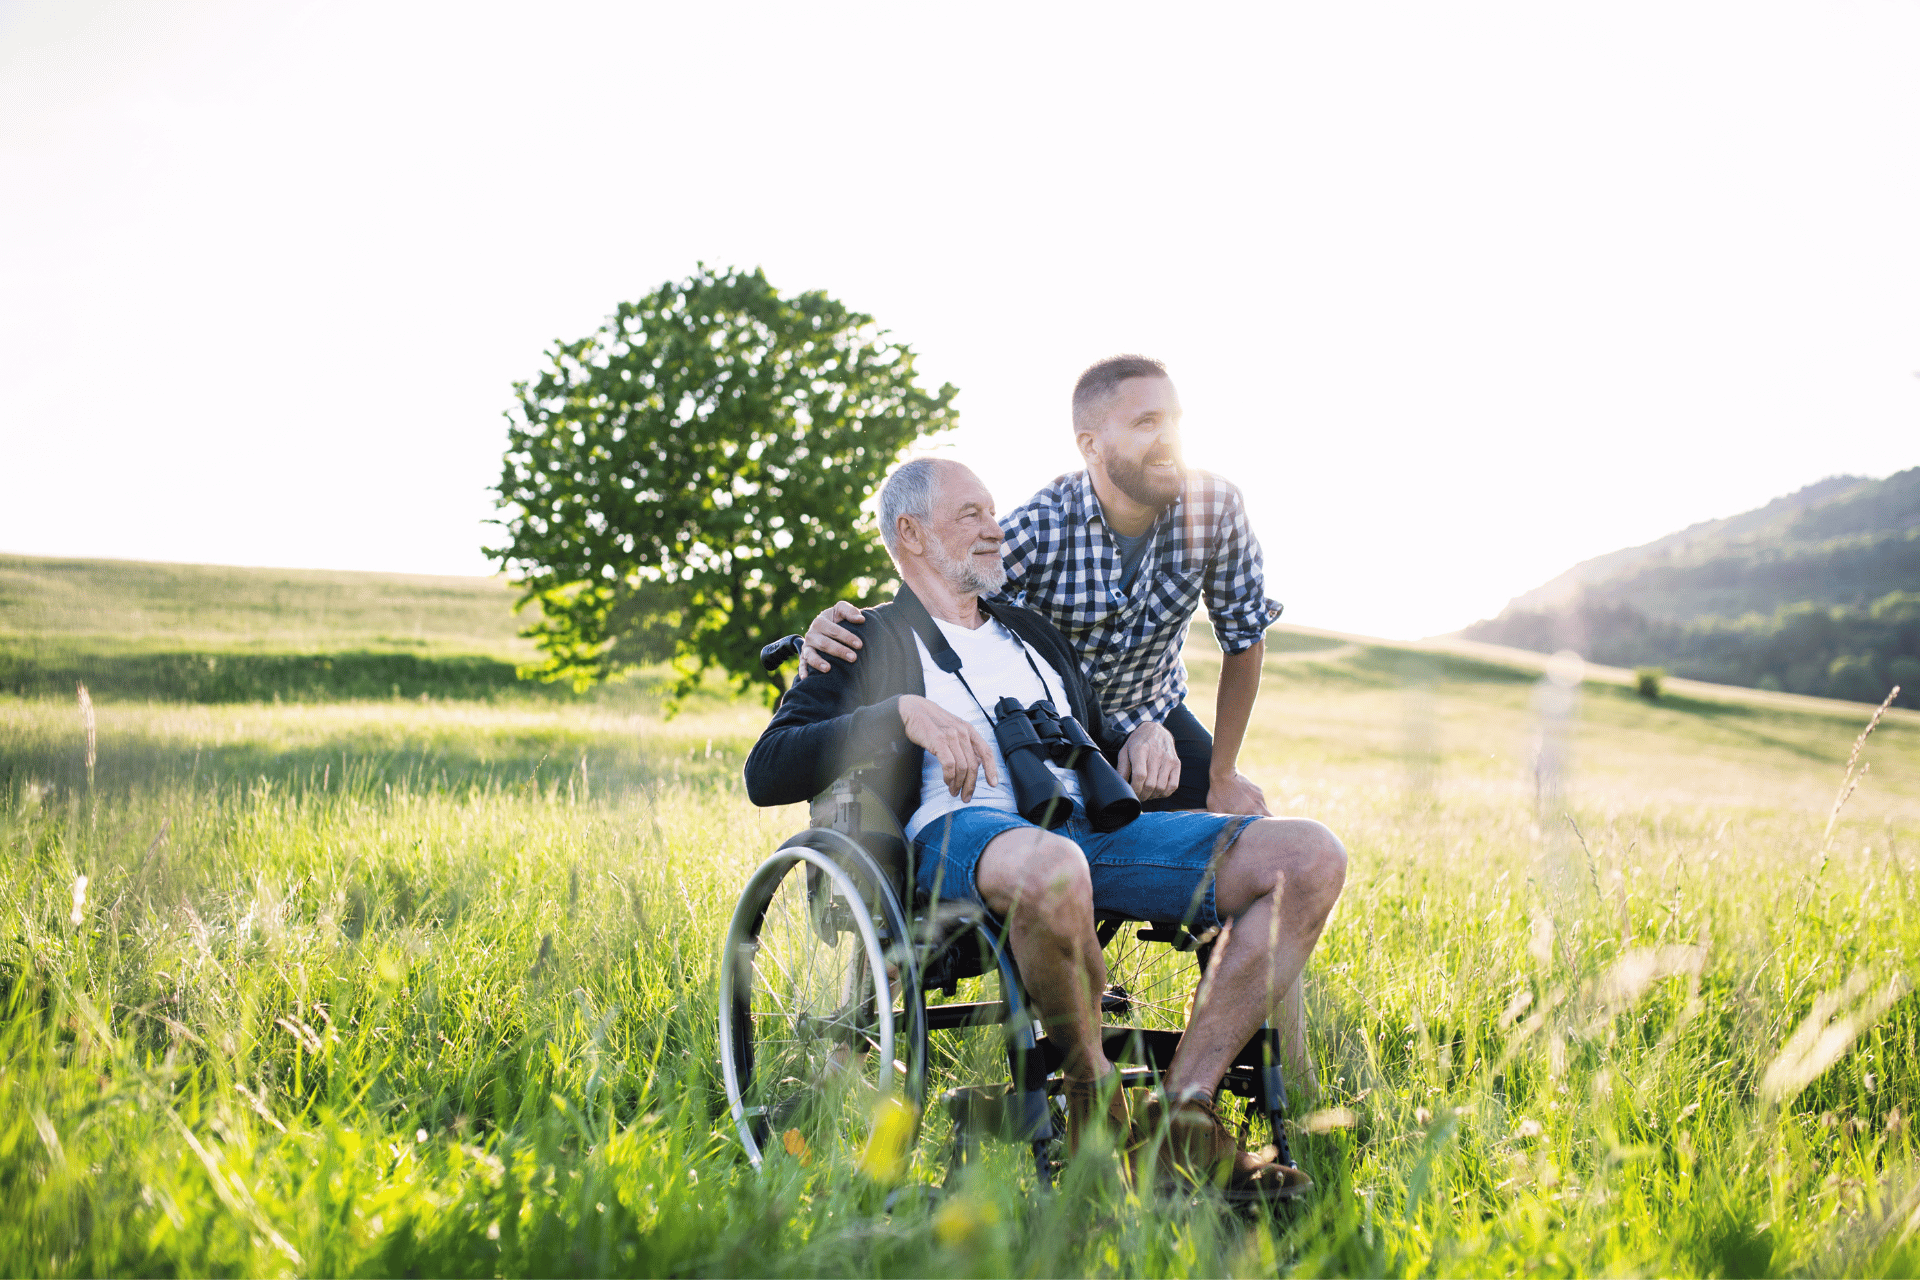 Man in a wheelchair in a field with looking glasses.